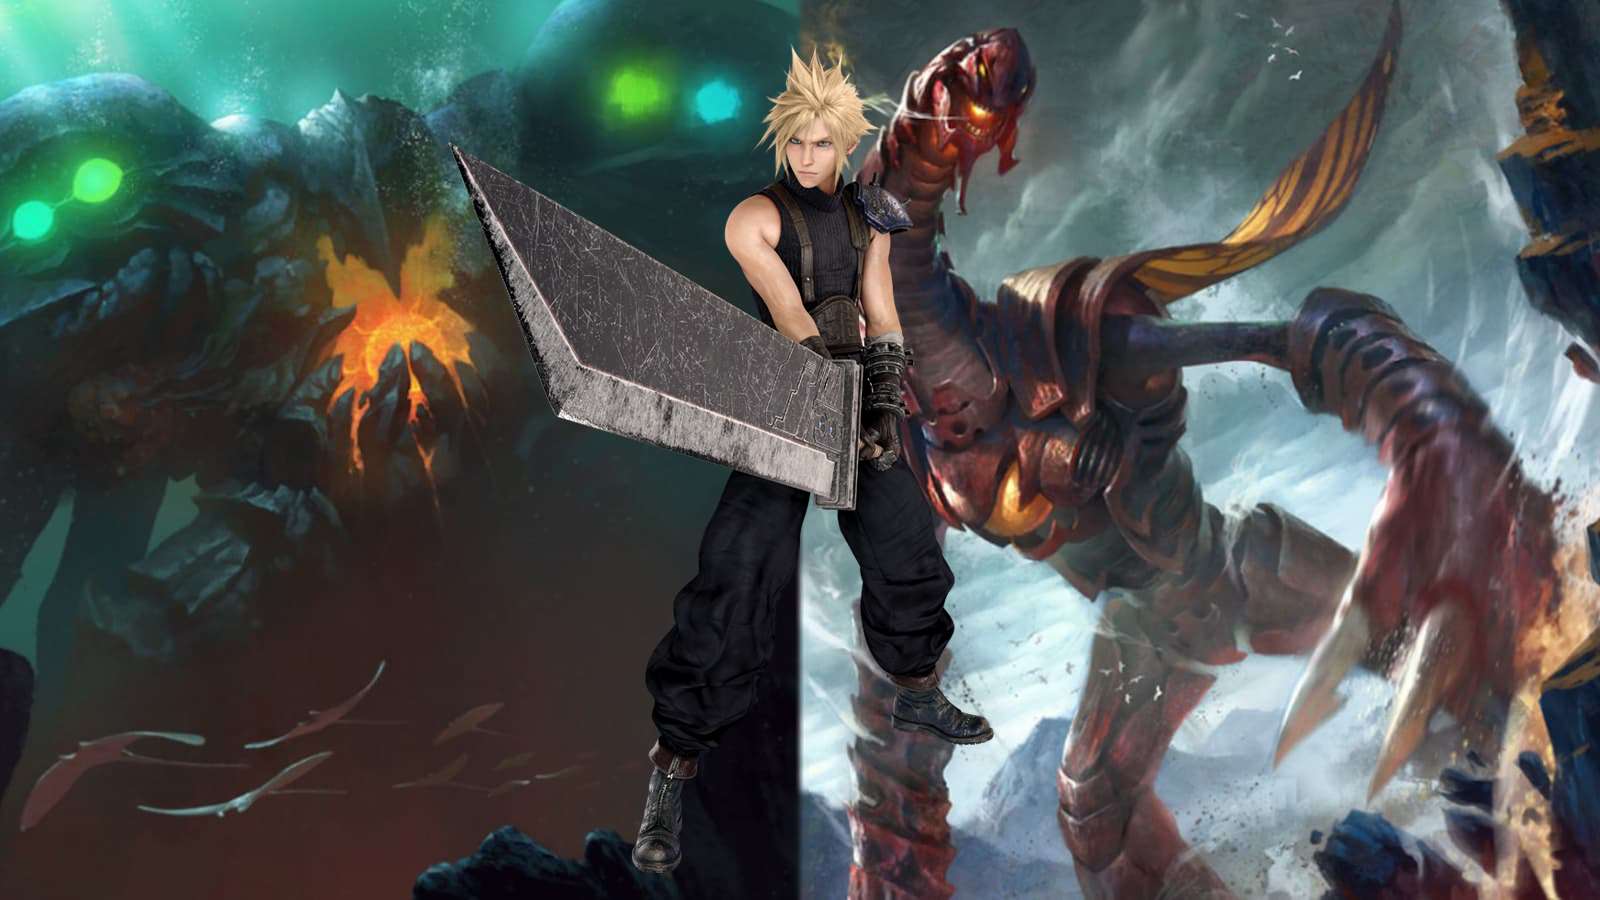 Cloud Strife from Final Fantasy VII Remake in front of emerald and ruby weapon